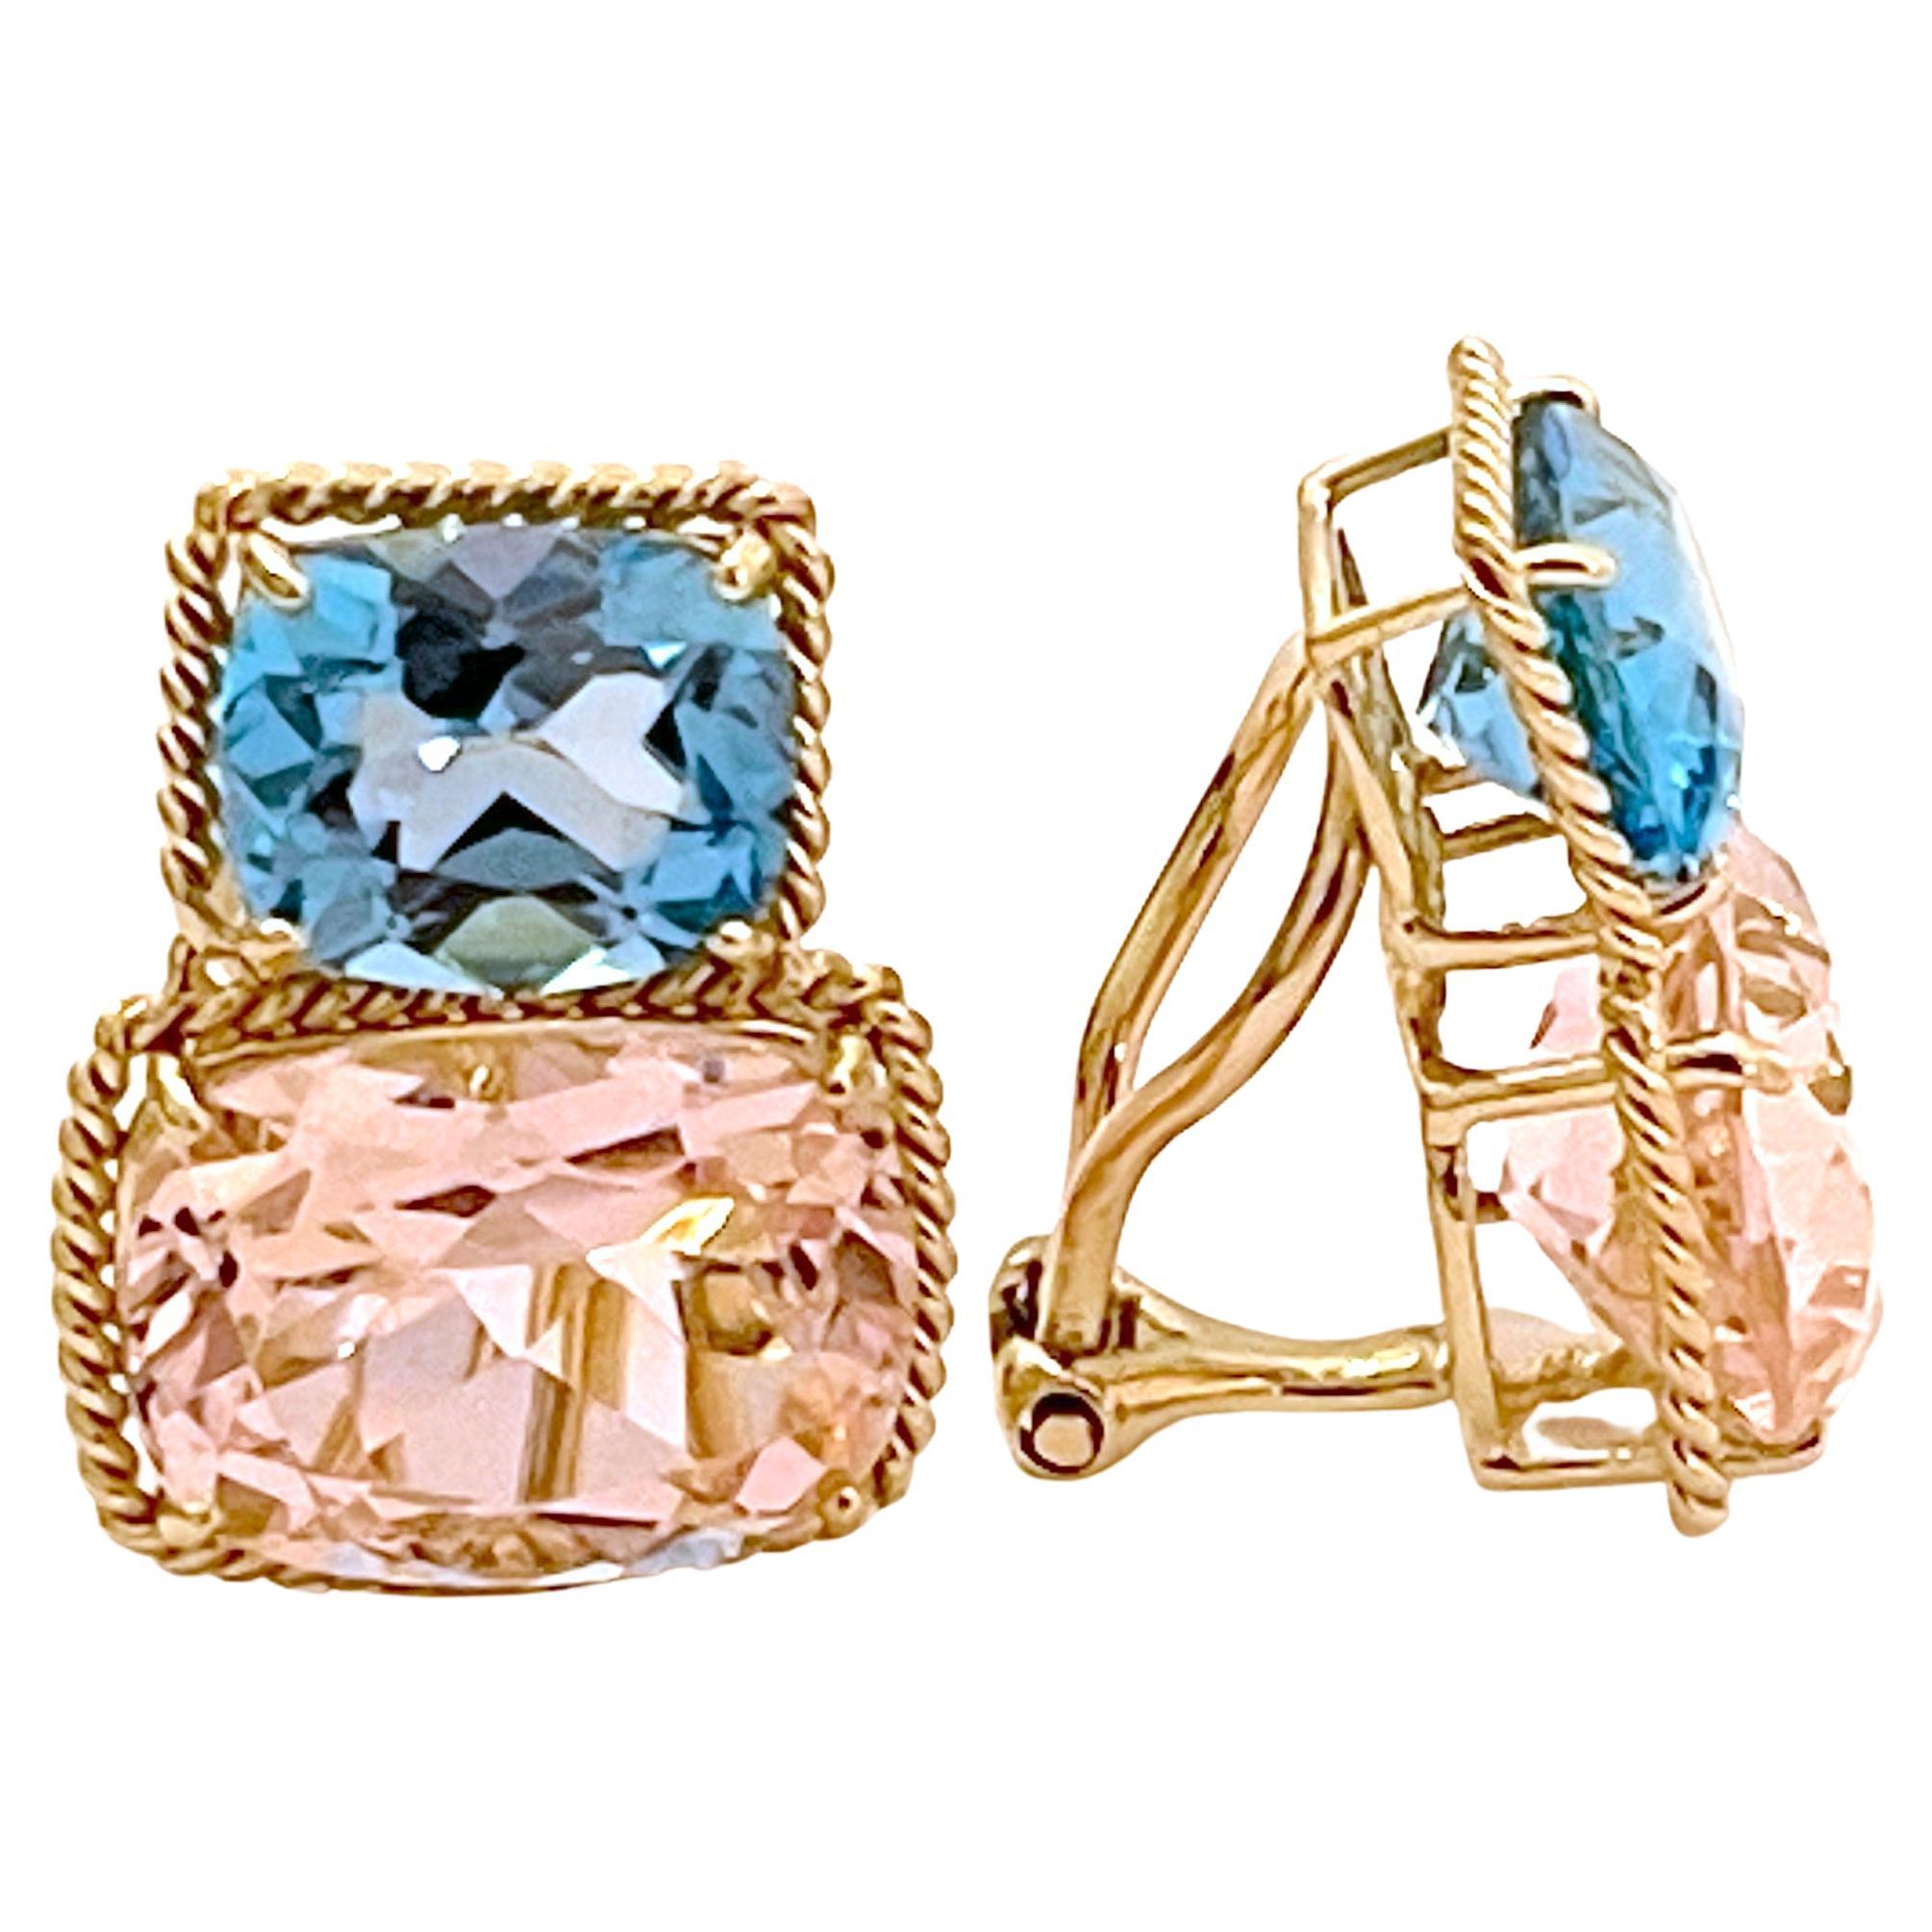 Rope Twist Border Earrings with Blue Topaz and Pink Topaz